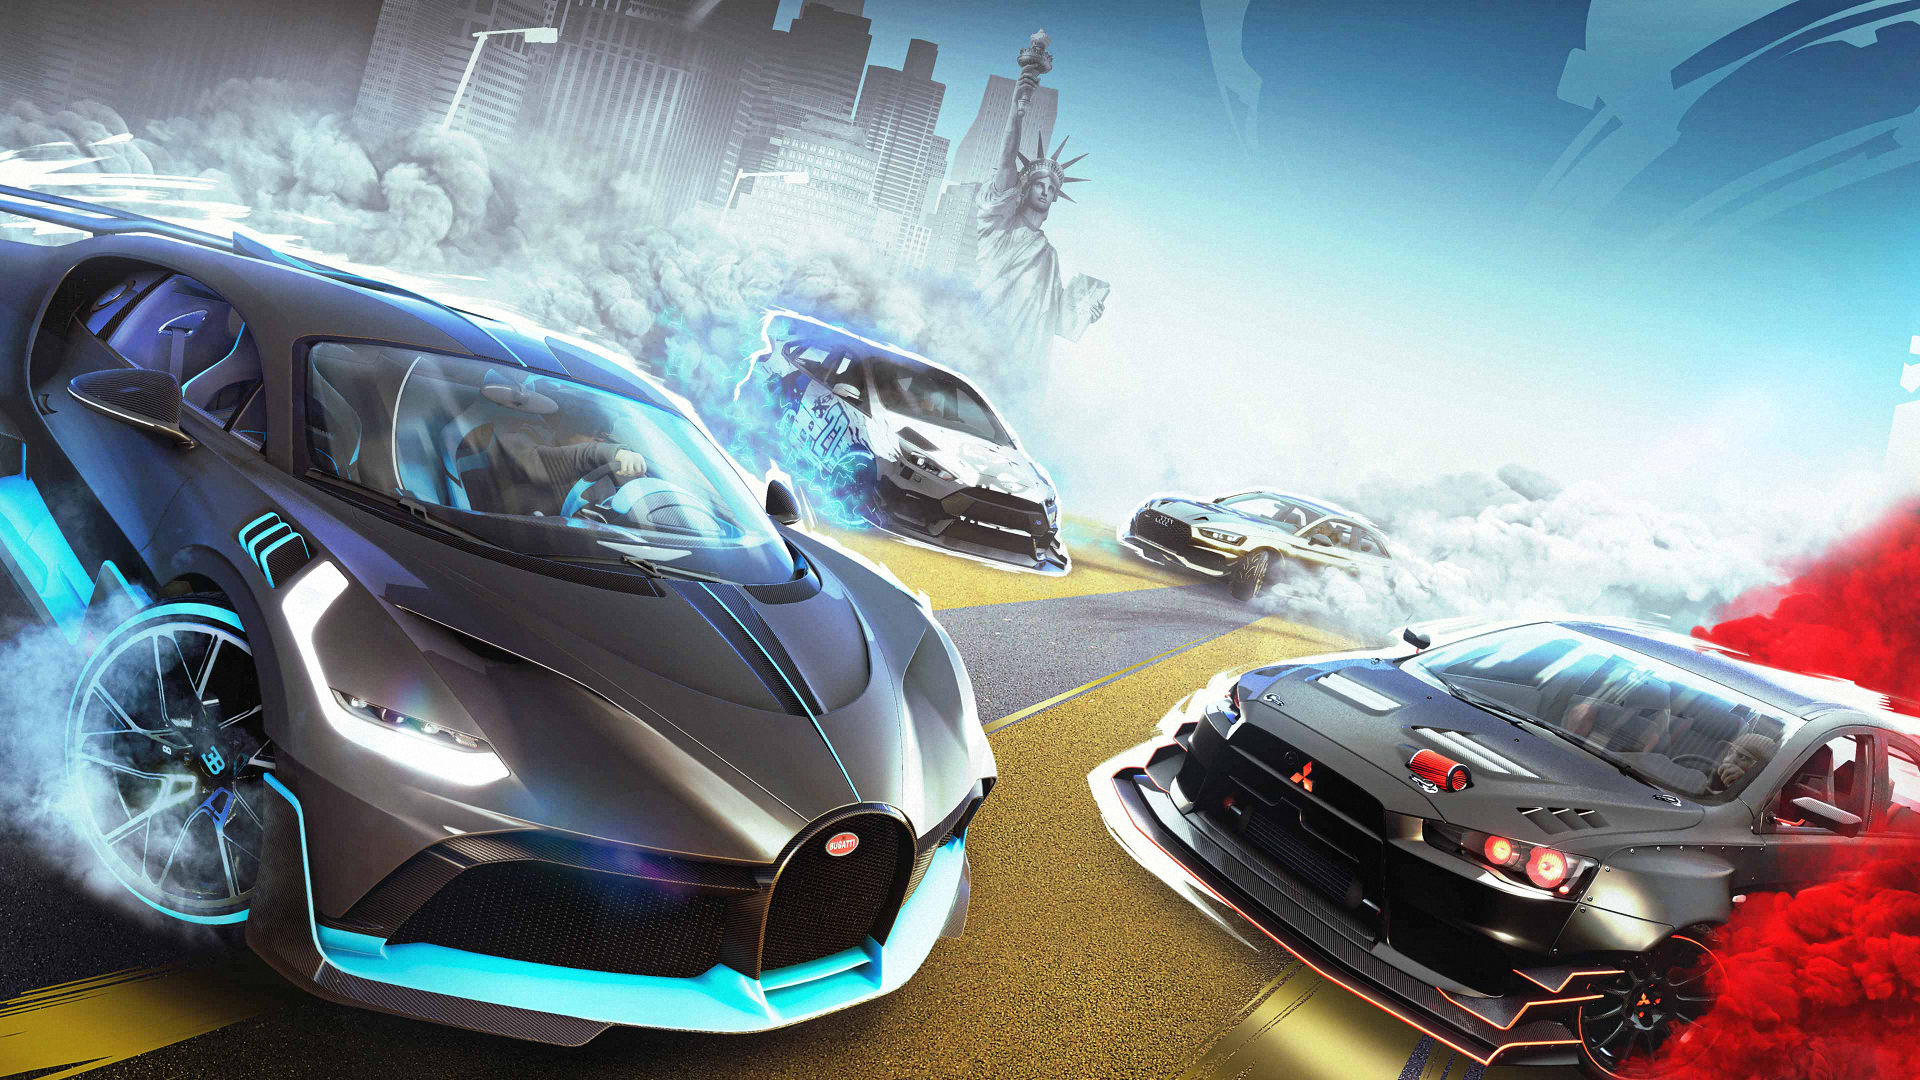 Video Game The Crew 2 1920x1080